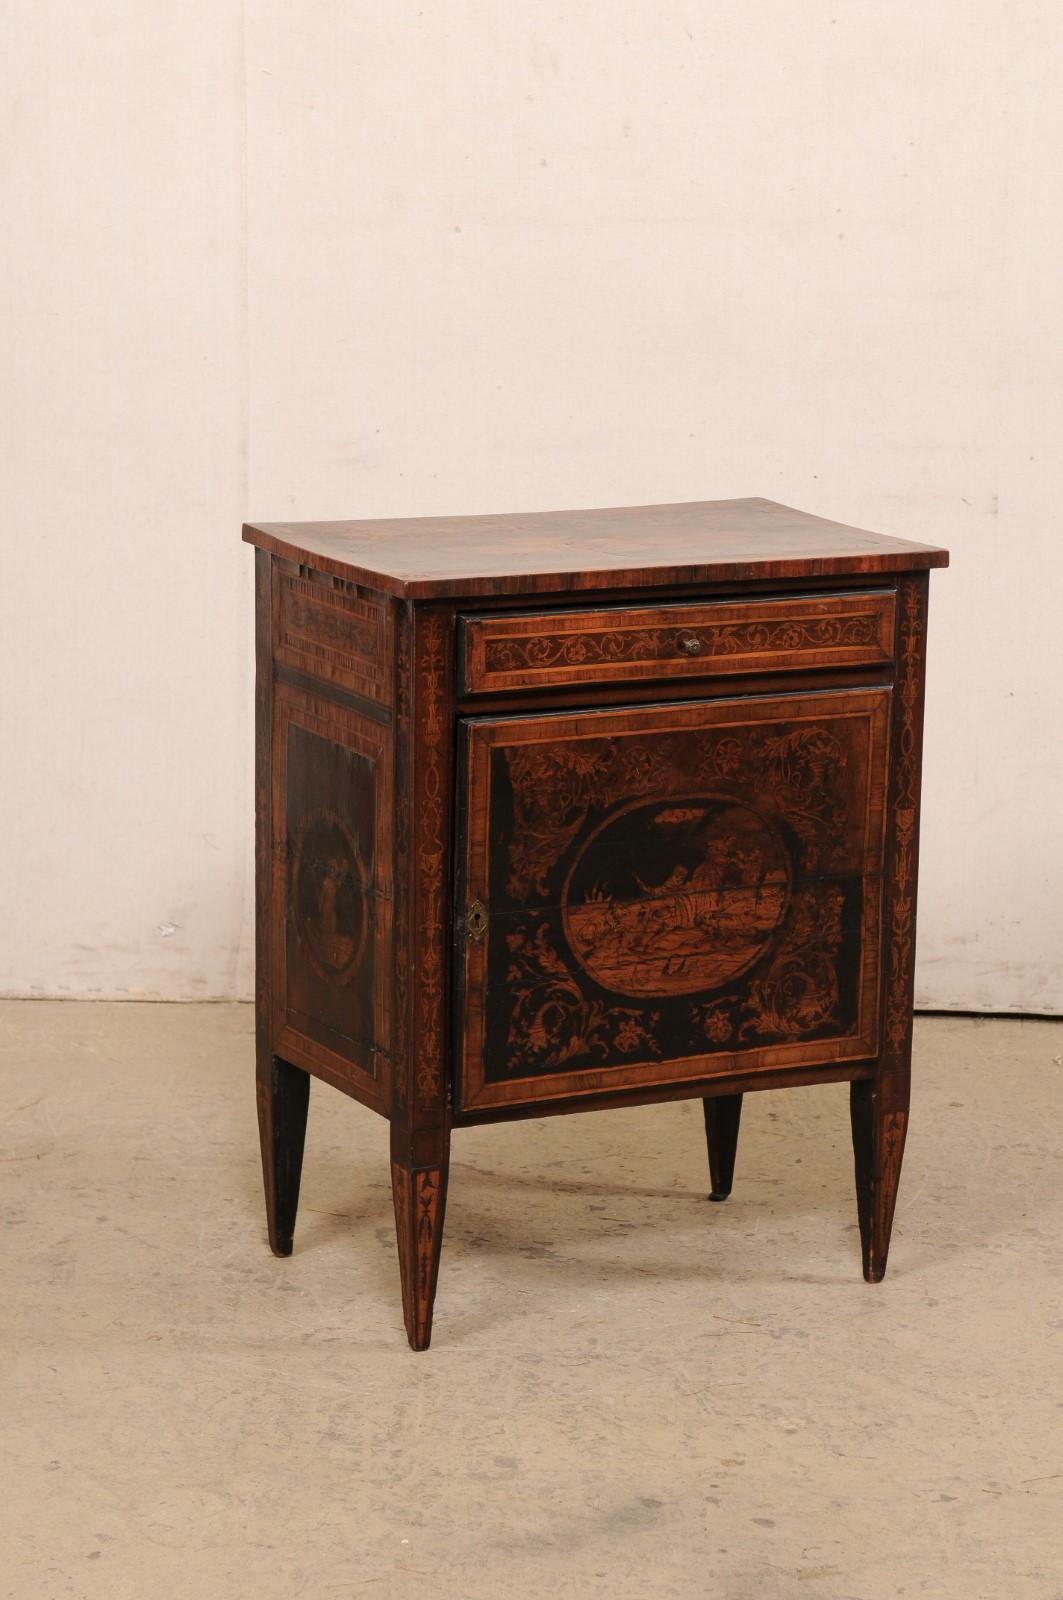 An Italian period Neoclassical small-sized comodino embellished with stunning marquetry, from the 18th century. This antique cabinet from Italy has been elaborately-crafted marquetry inlays about its top and three sides in various designs of